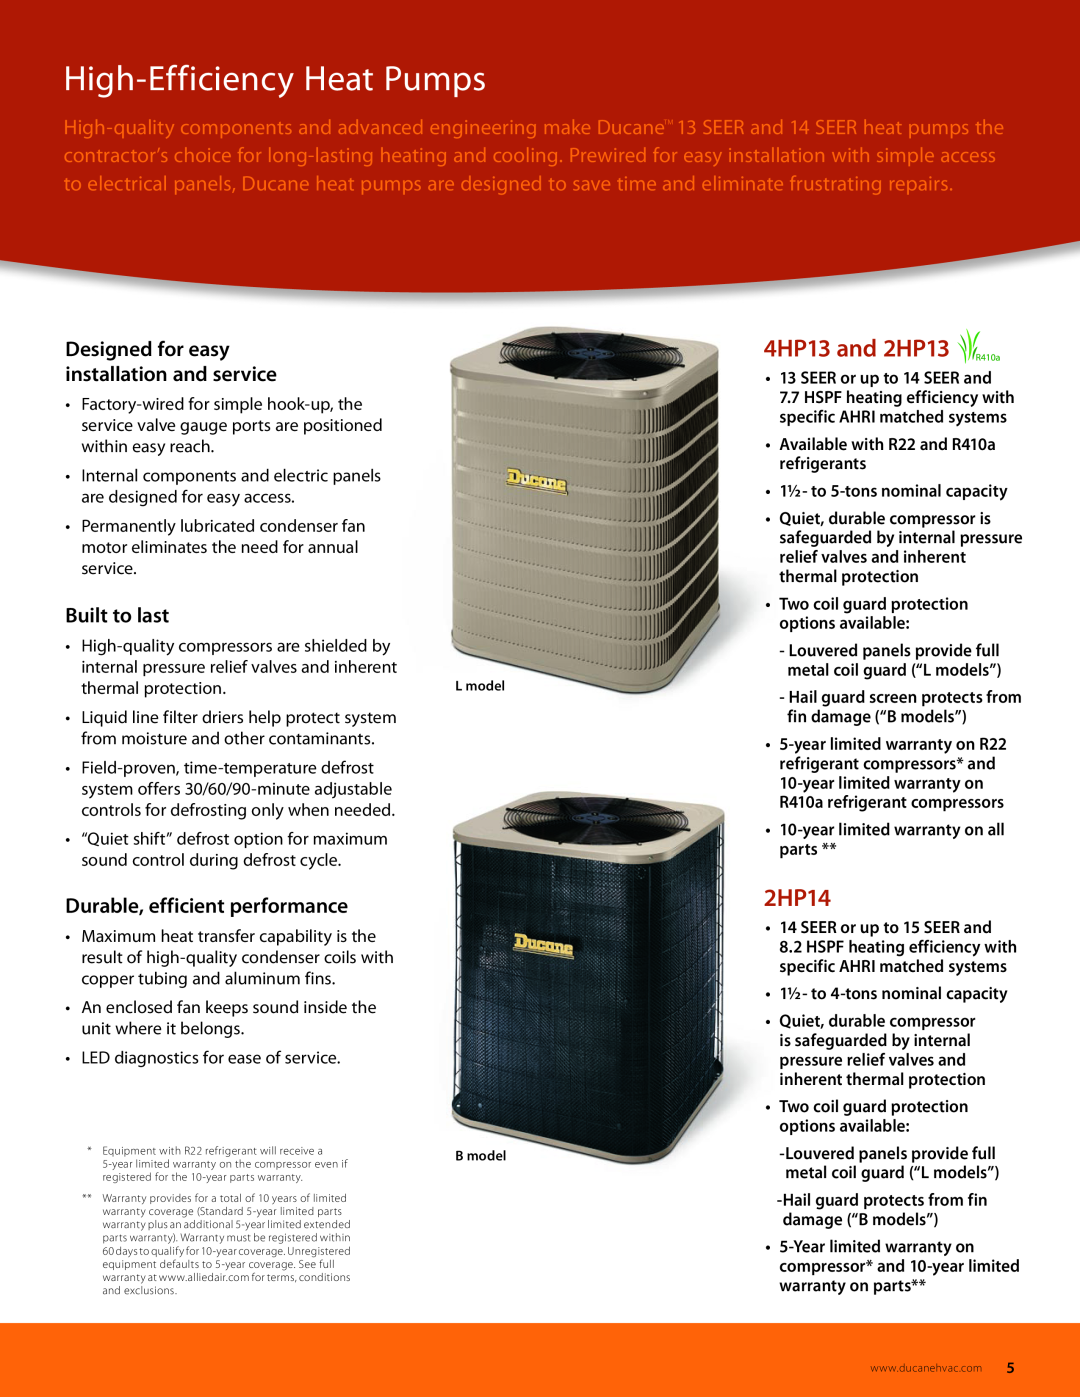 Ducane (HVAC) Air Conditioning and Heating manual High-EfficiencyHeat Pumps, 4HP13 and 2HP13, 2HP14, Built to last 